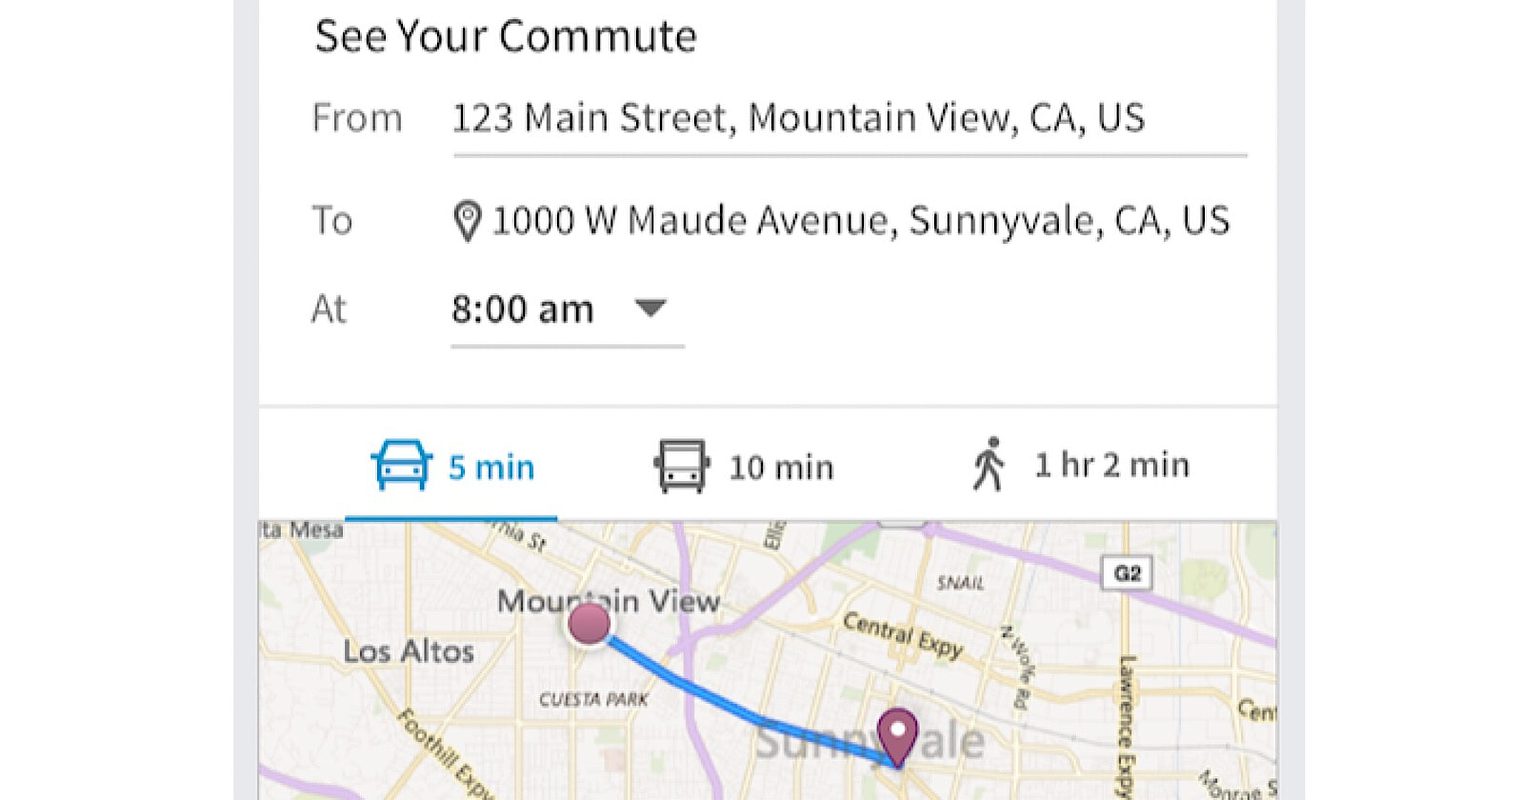 LinkedIn Teams Up With Bing Maps to Show Commute Times on Job Postings